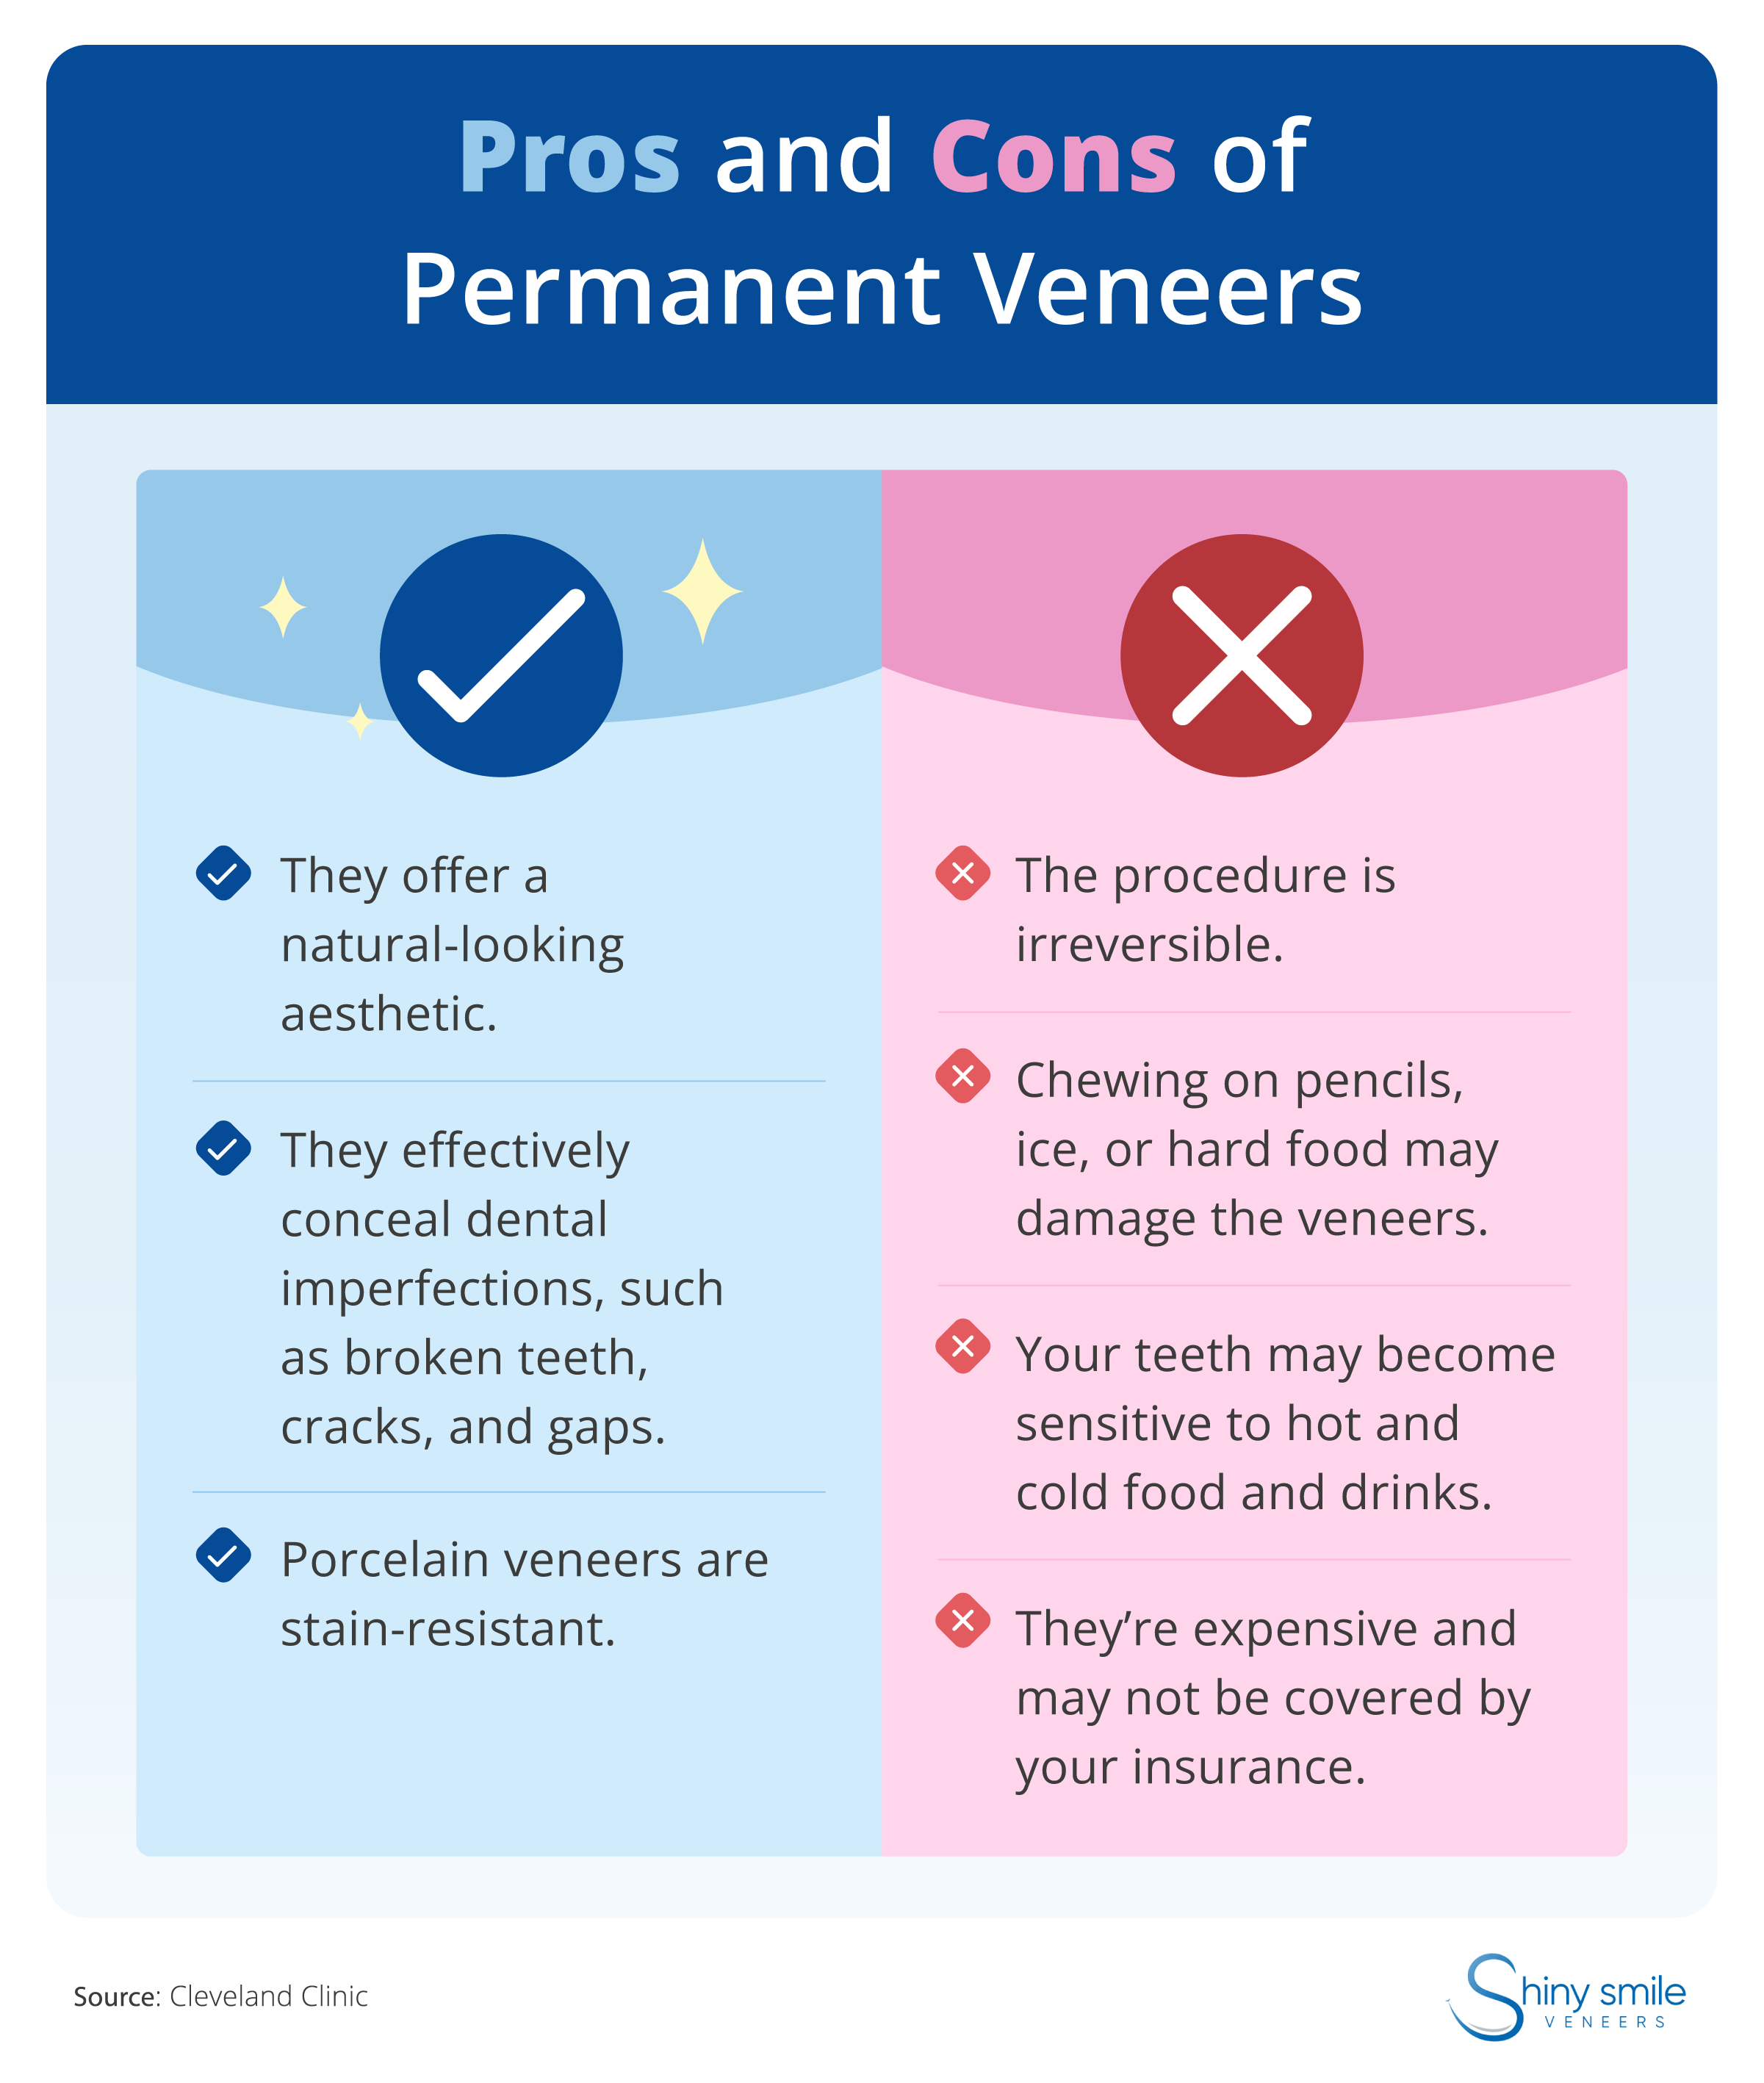 A list of the pros and cons of permanent veneers